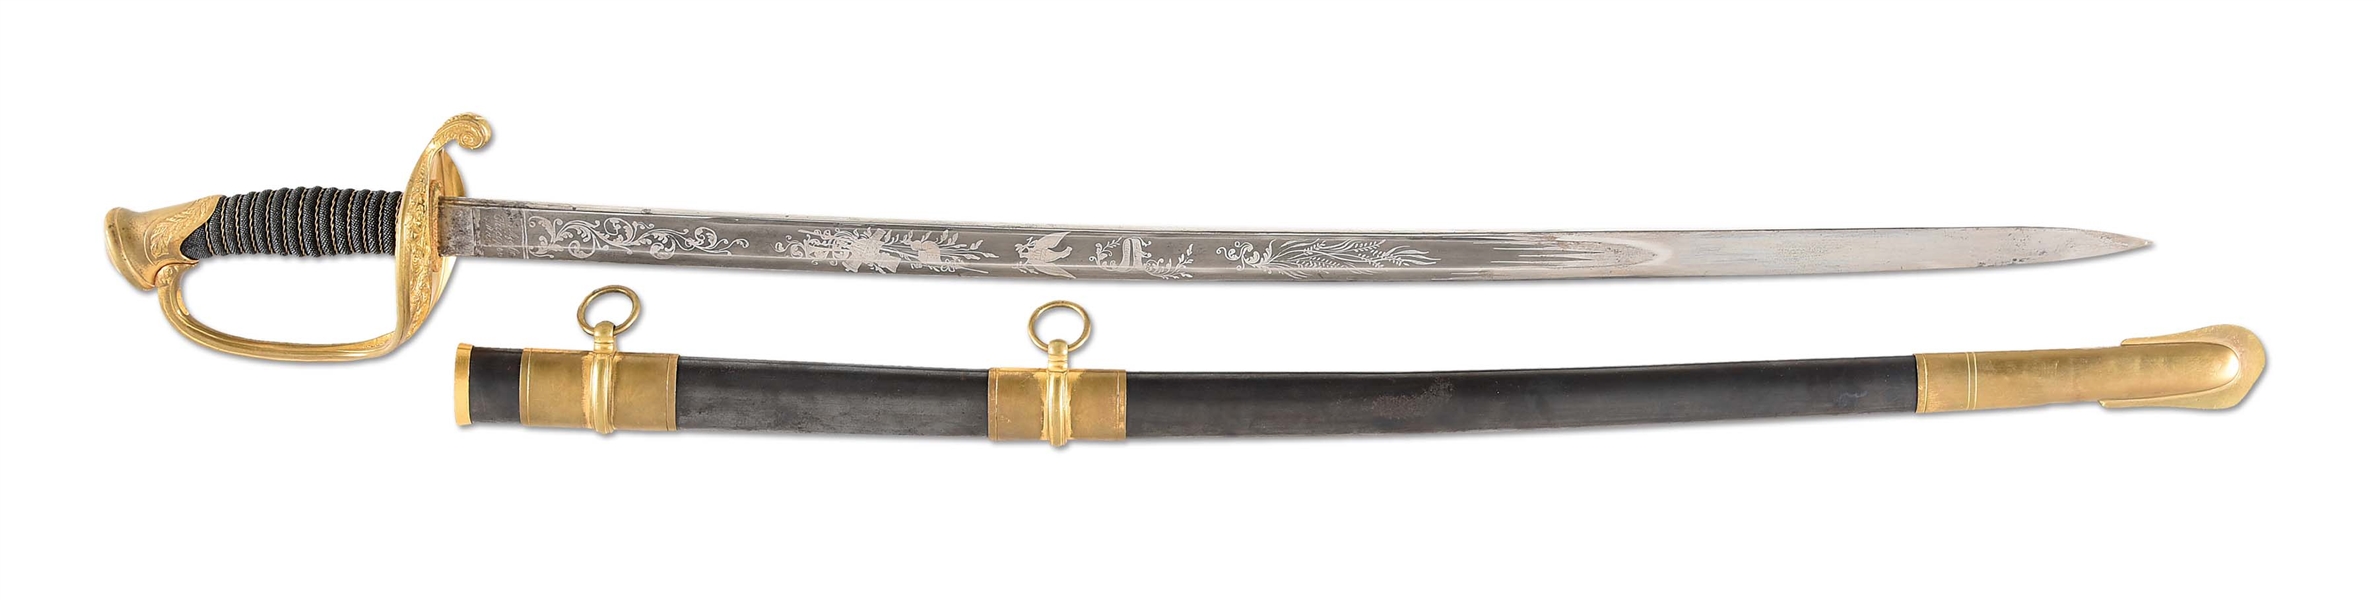 US CIVIL WAR AMES M1850 FOOT OFFICER’S SWORD WITH METAL SCABBARD.